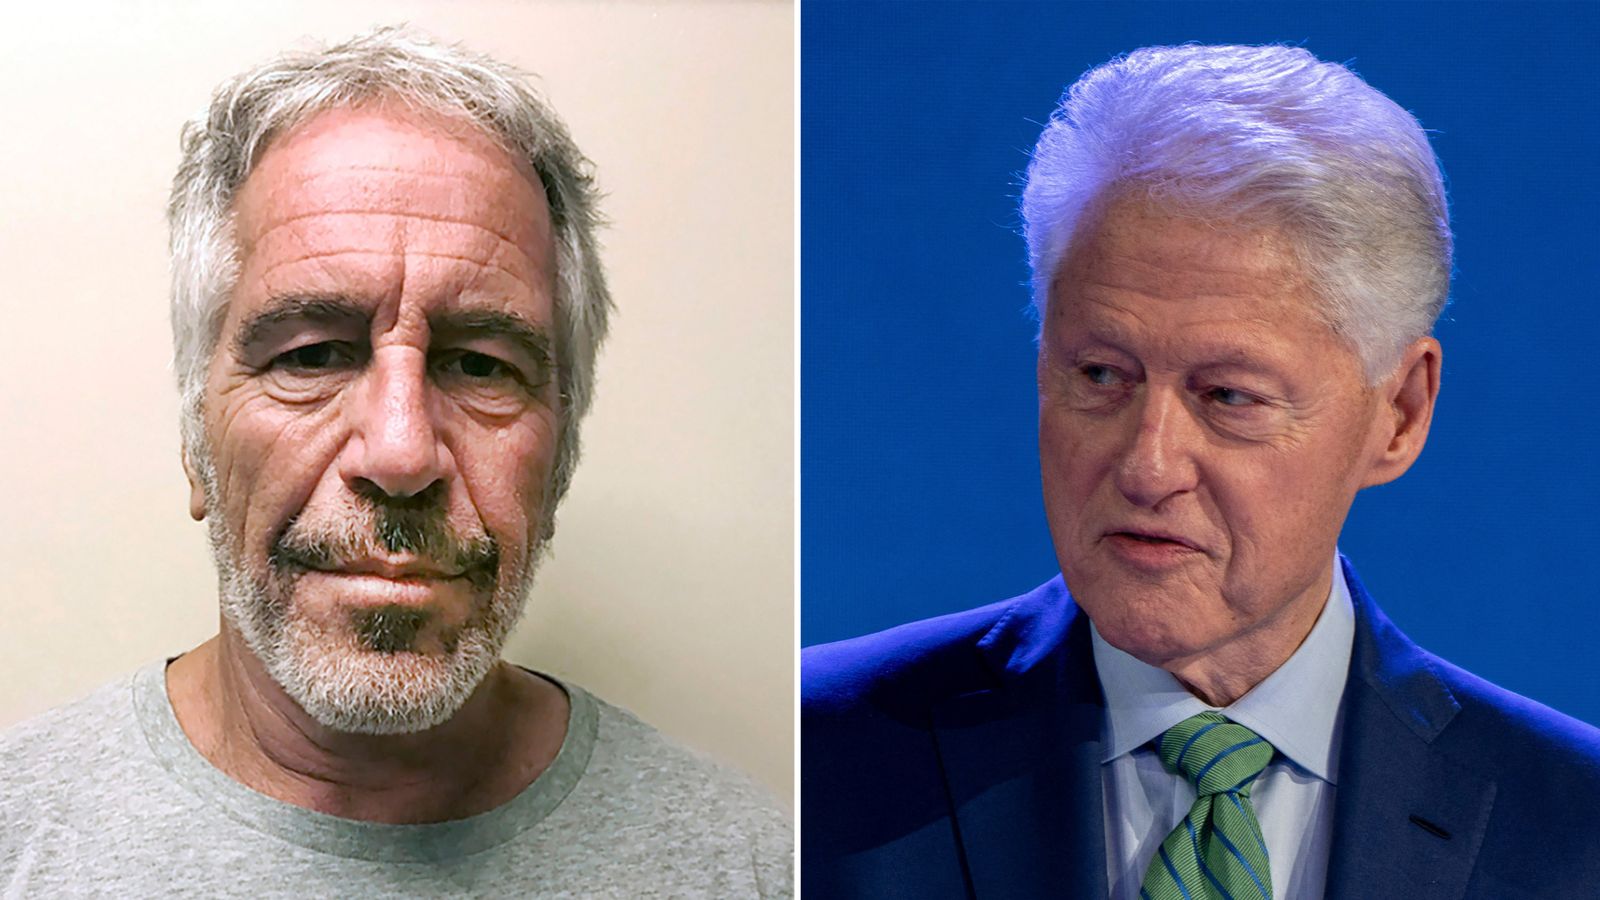 Jeffrey Epstein court documents: Bill Clinton 'threatened' magazine not to publish articles about his 'good friend'